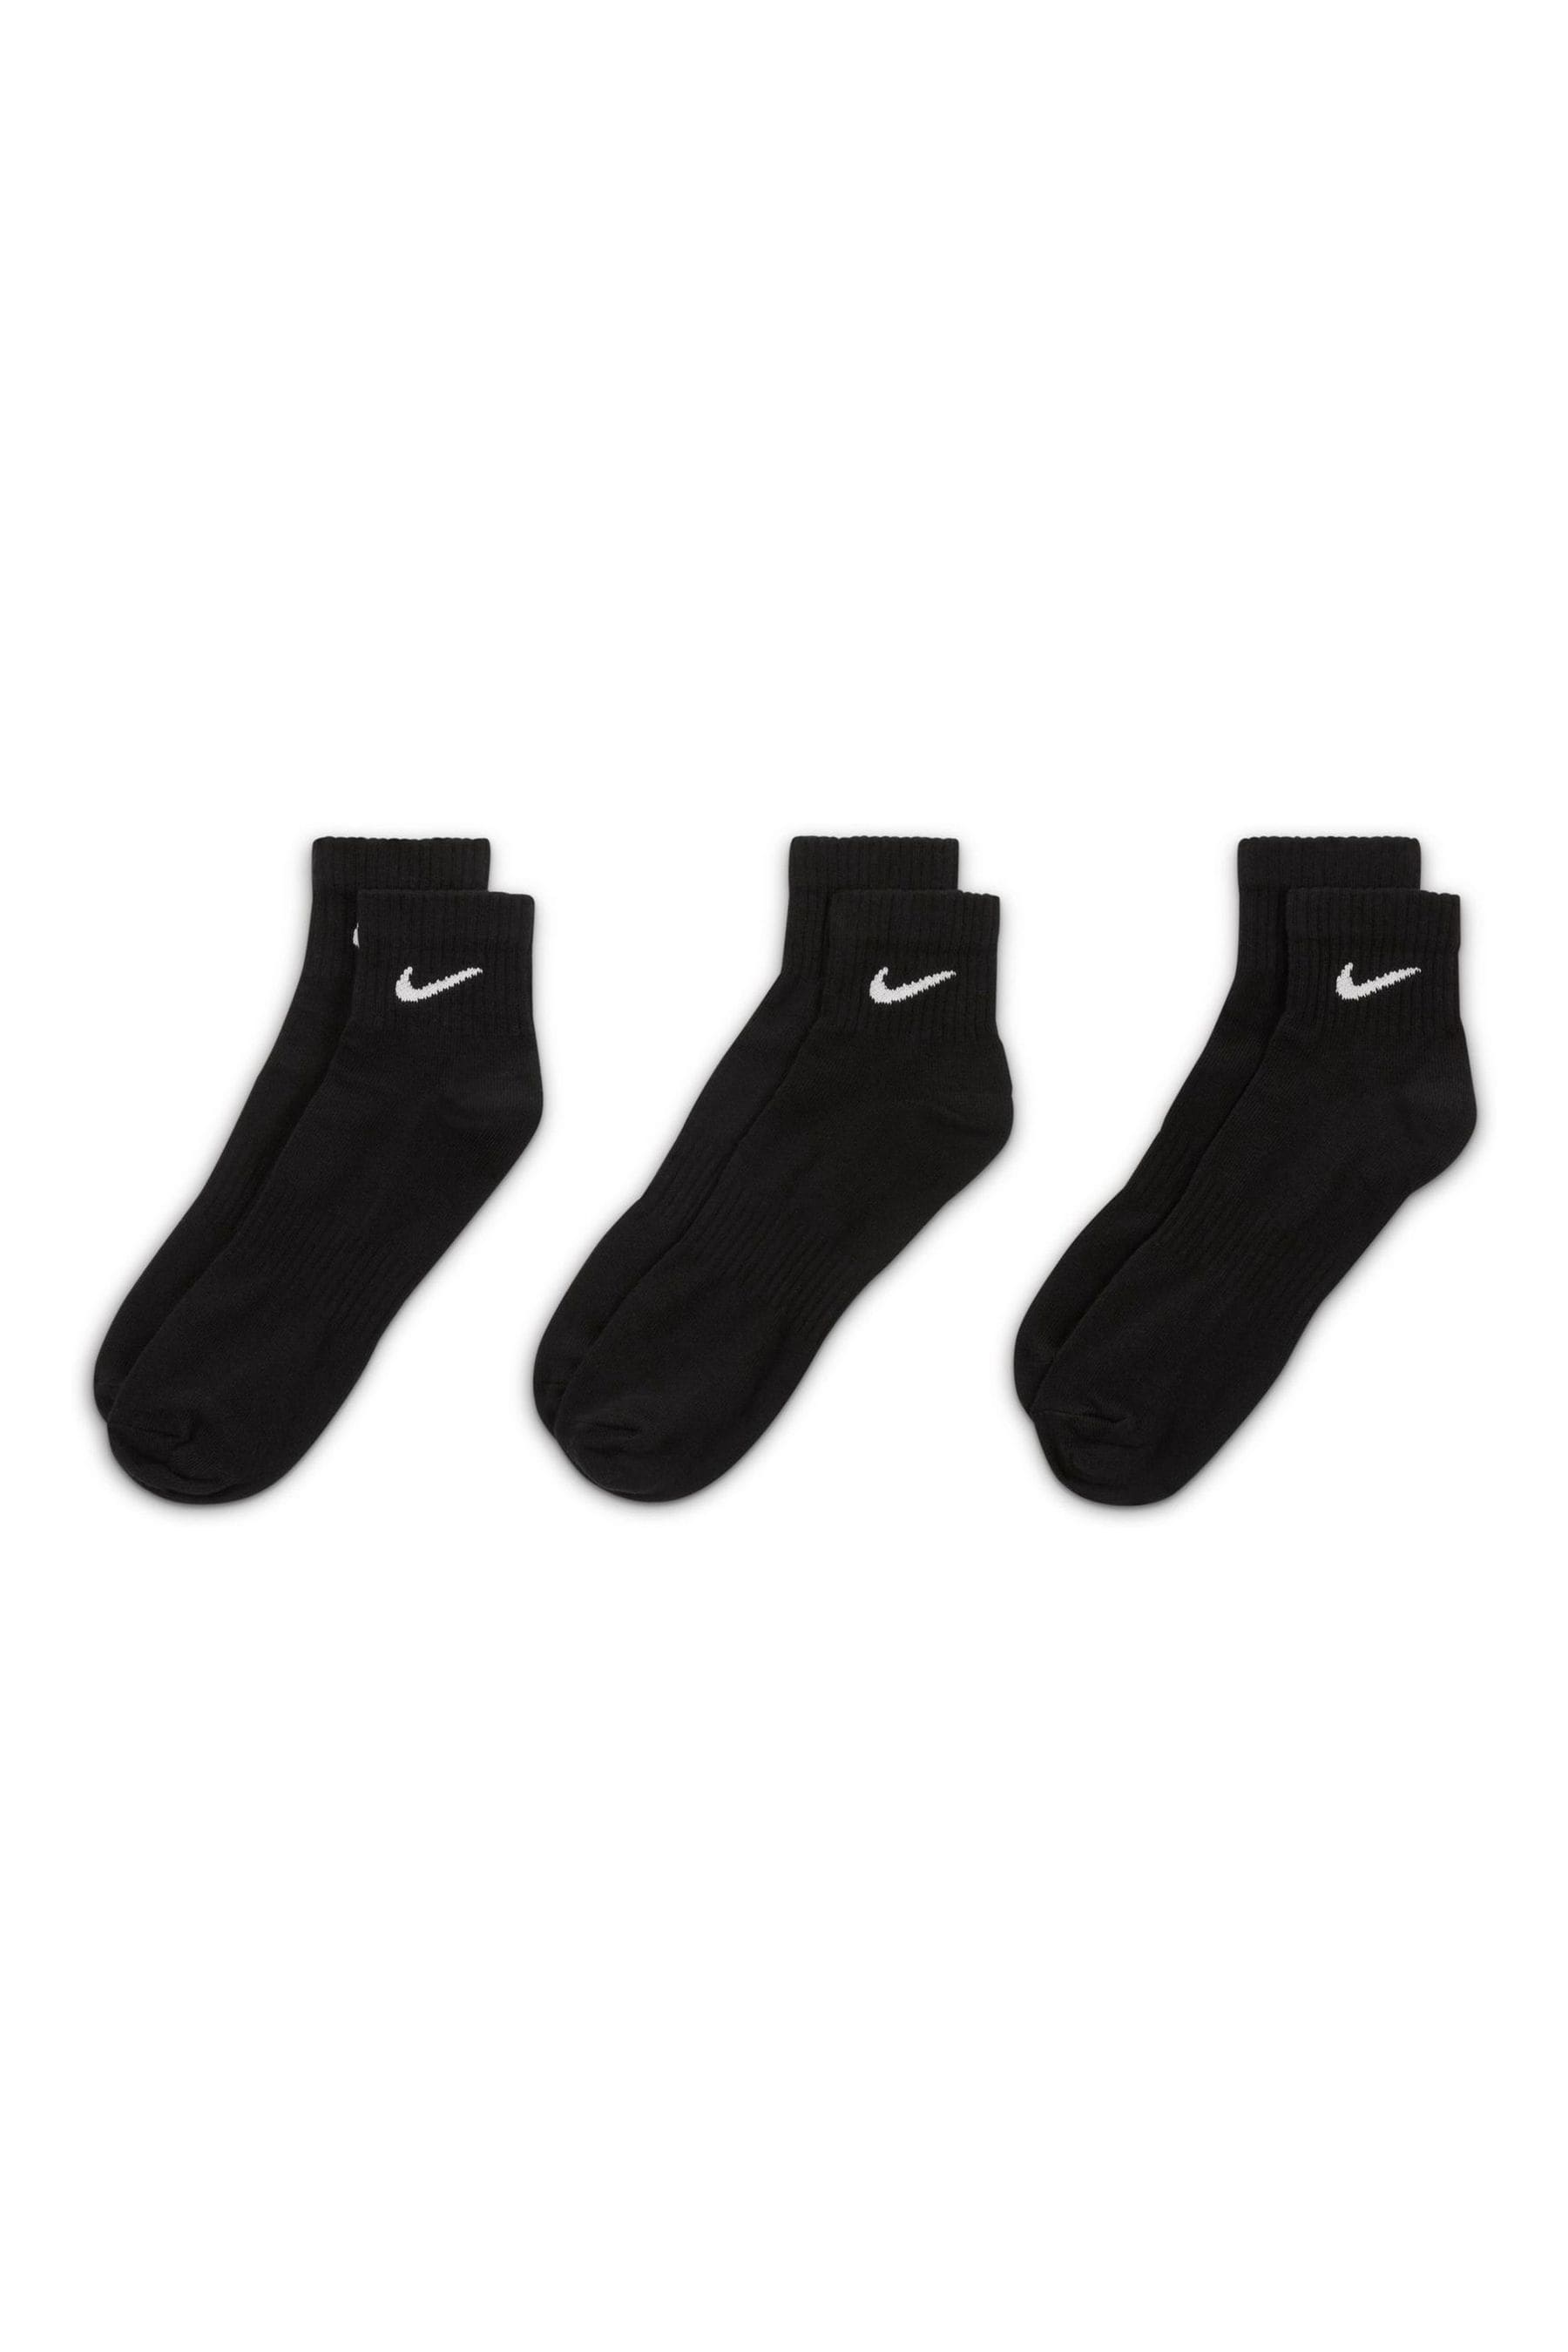 Buy Nike Lightweight Everyday Ankle Socks 3pk from the Next UK online shop